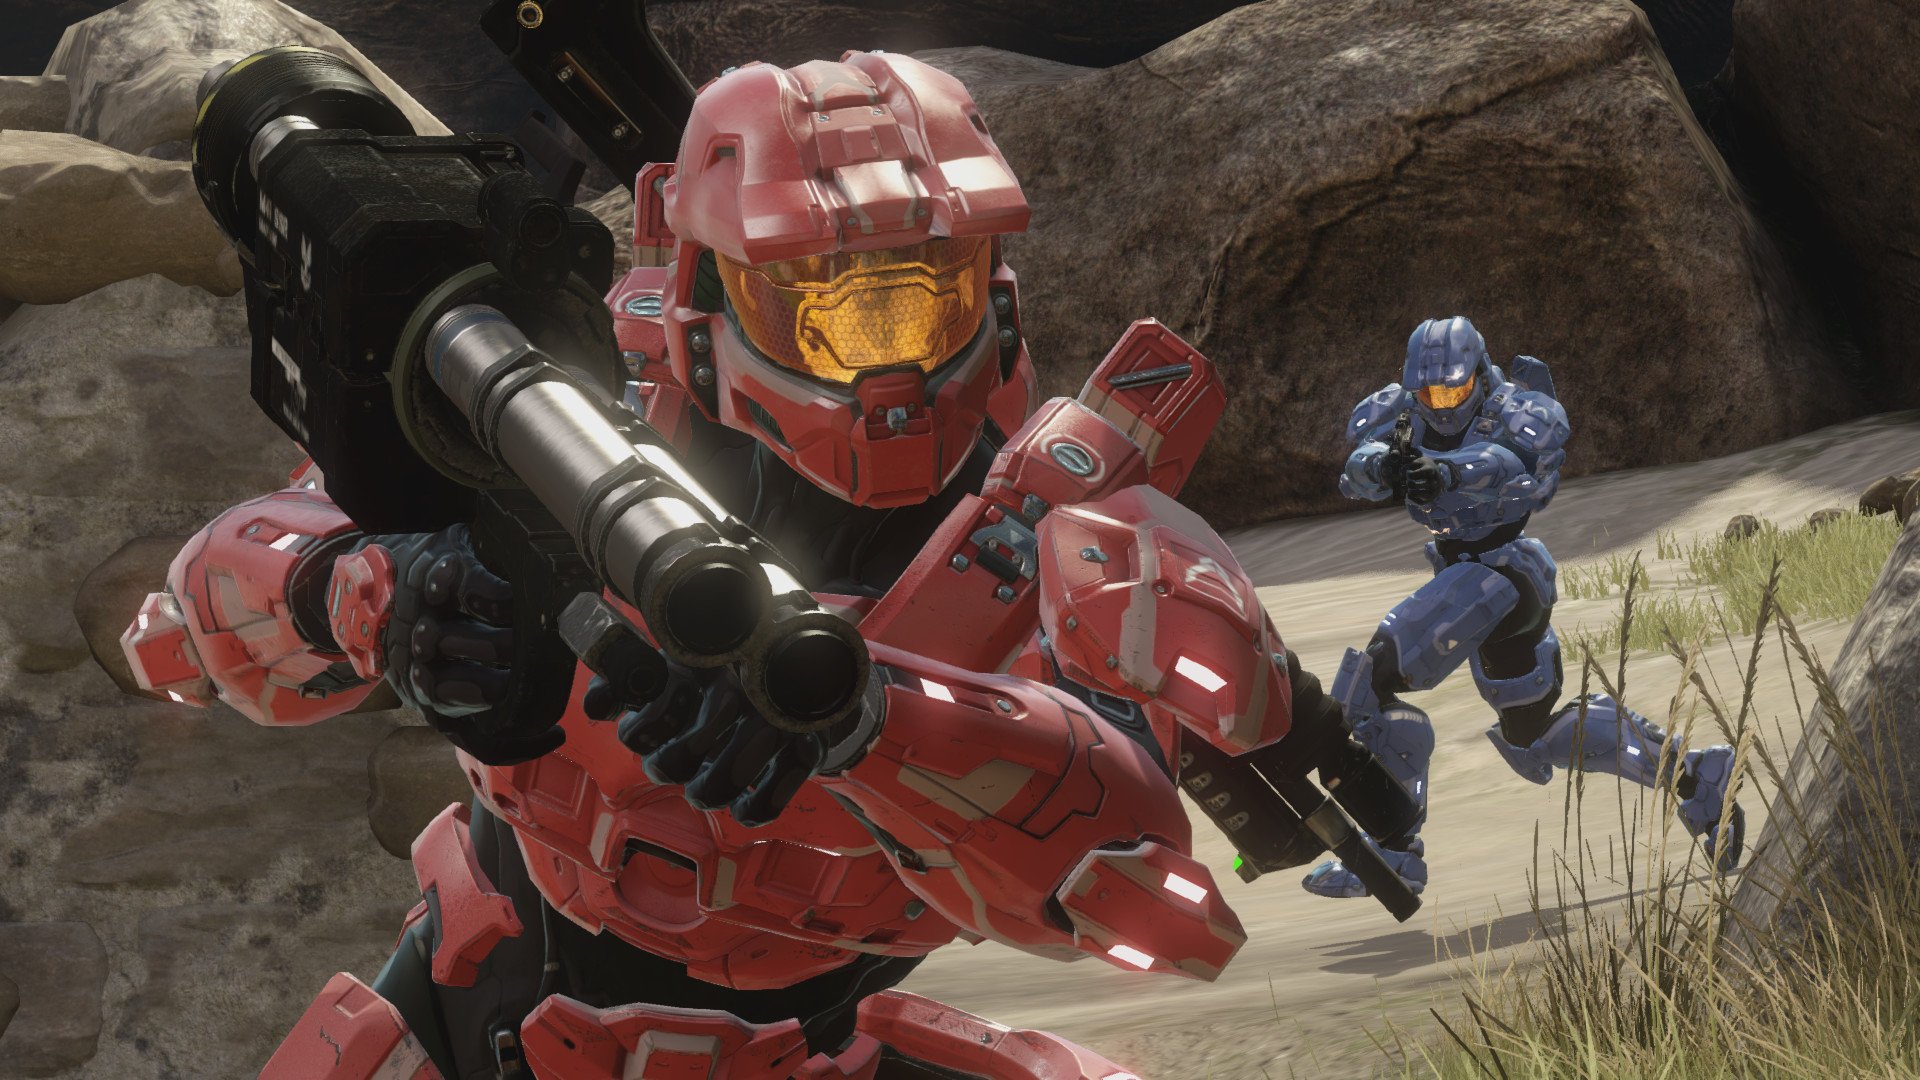 Halo: The Master Chief Collection Is Now Playable On Steam Deck - GameSpot